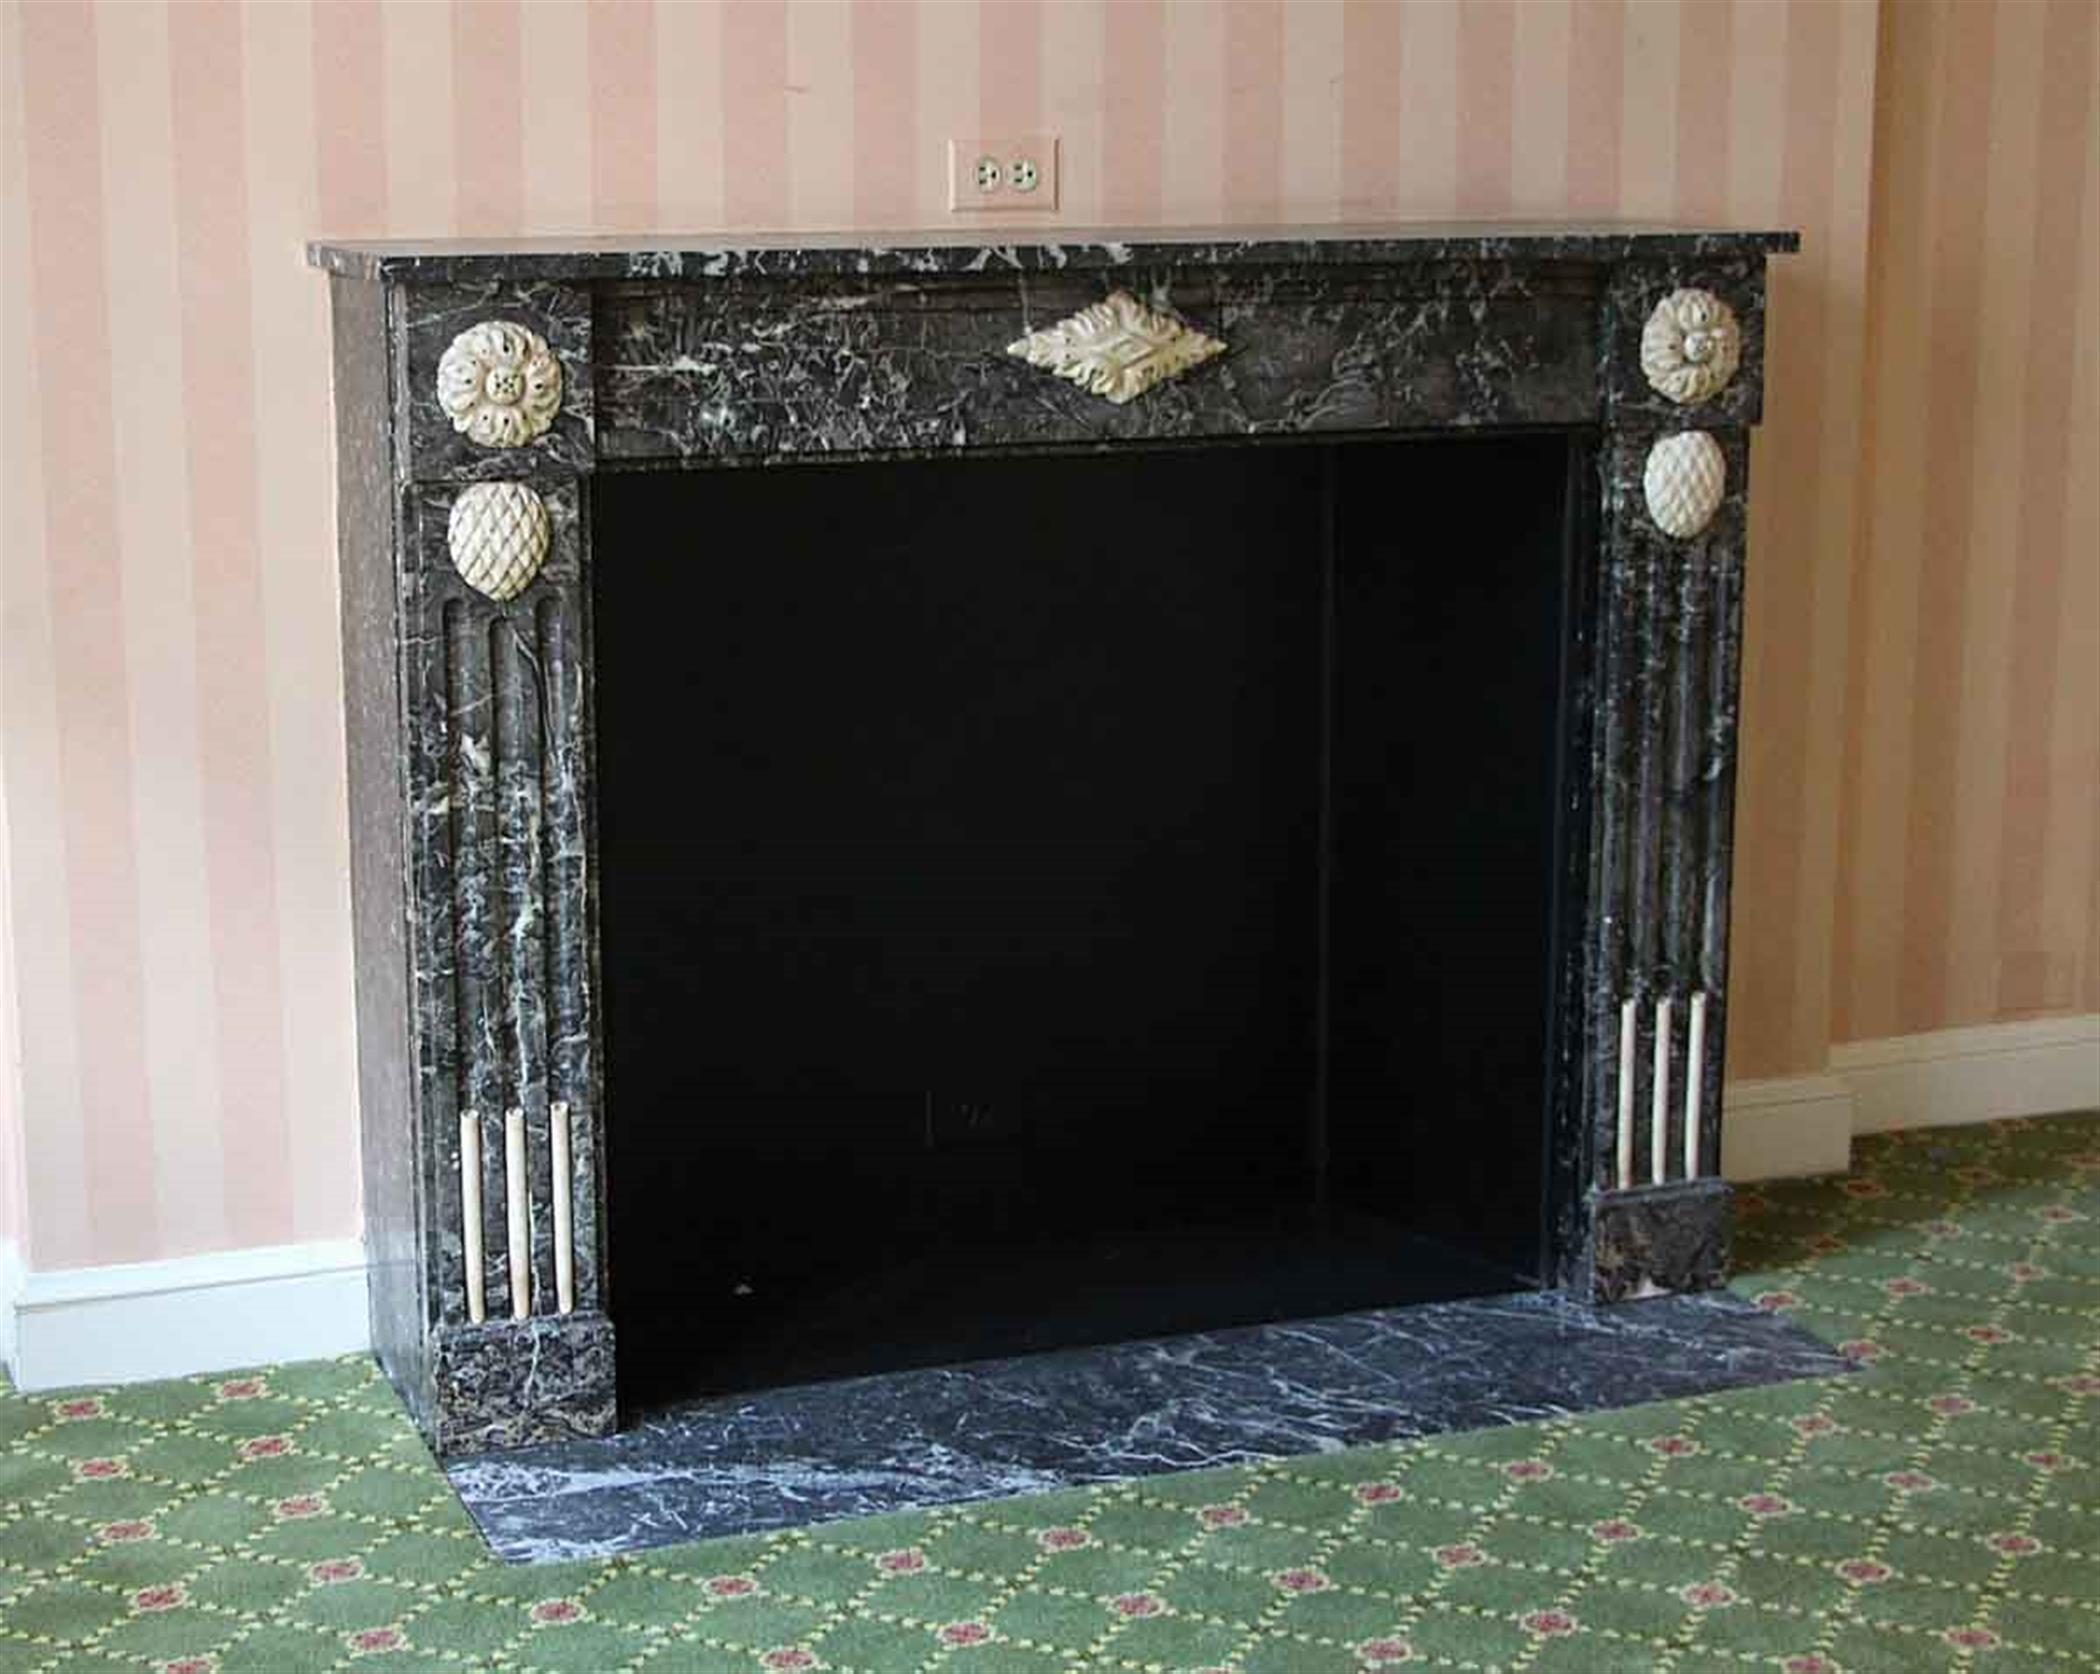 Hearth not included. French made hand carved 1880s French Regency gray marble mantel with floral detail. This mantel was one of a group of antique mantels imported from France and installed in the NYC Waldorf Astoria Hotel in 1931 when the hotel was